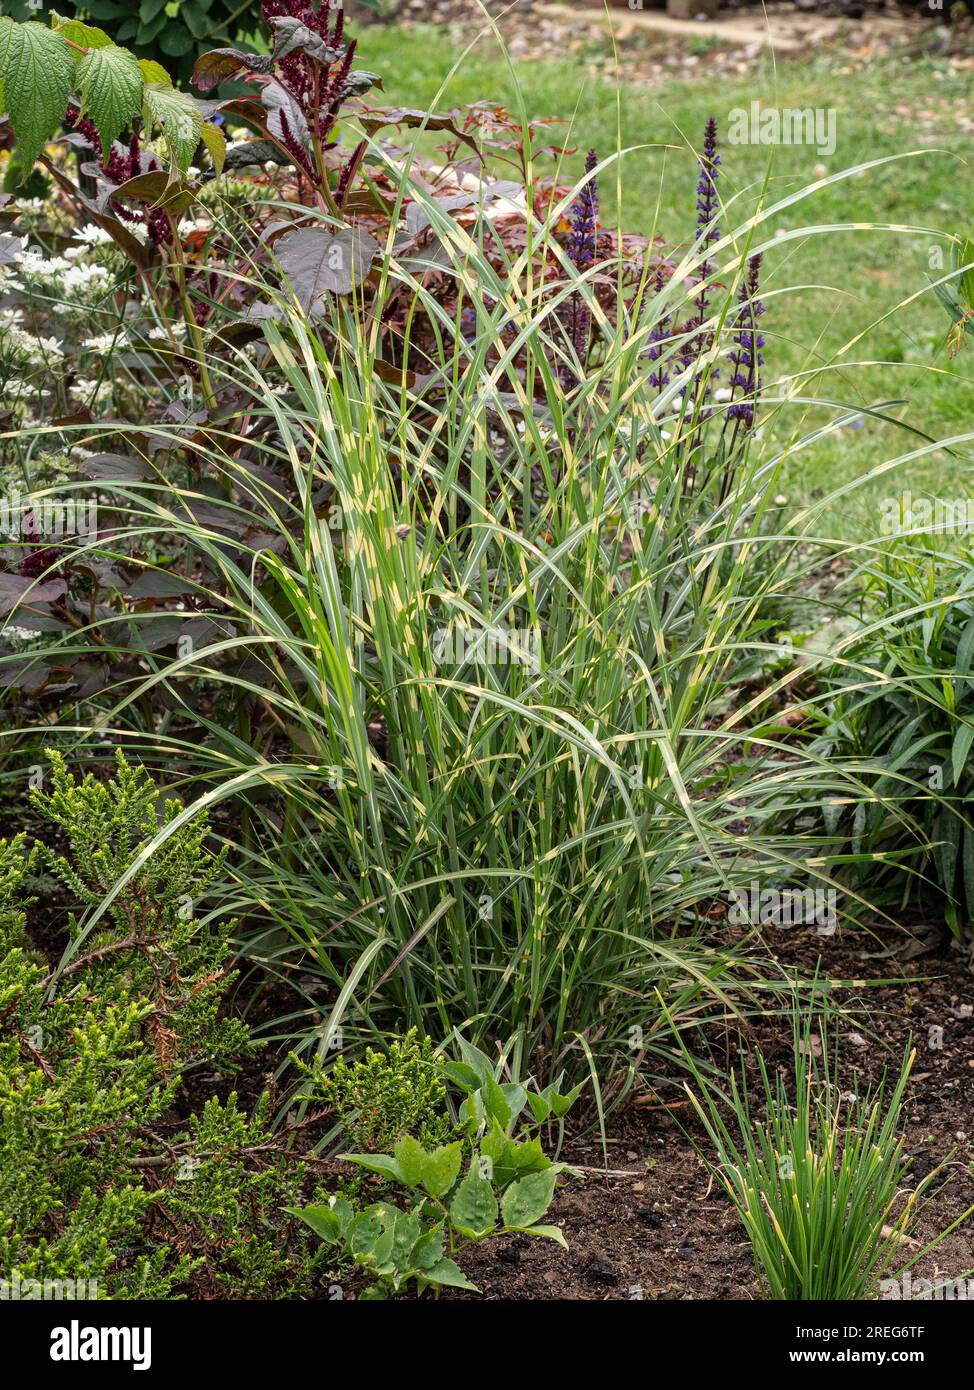 A clump of white striped foliage of Miscanthus sinensis 'Little Zebra' growing in a border with small shrubs and perennials Stock Photo